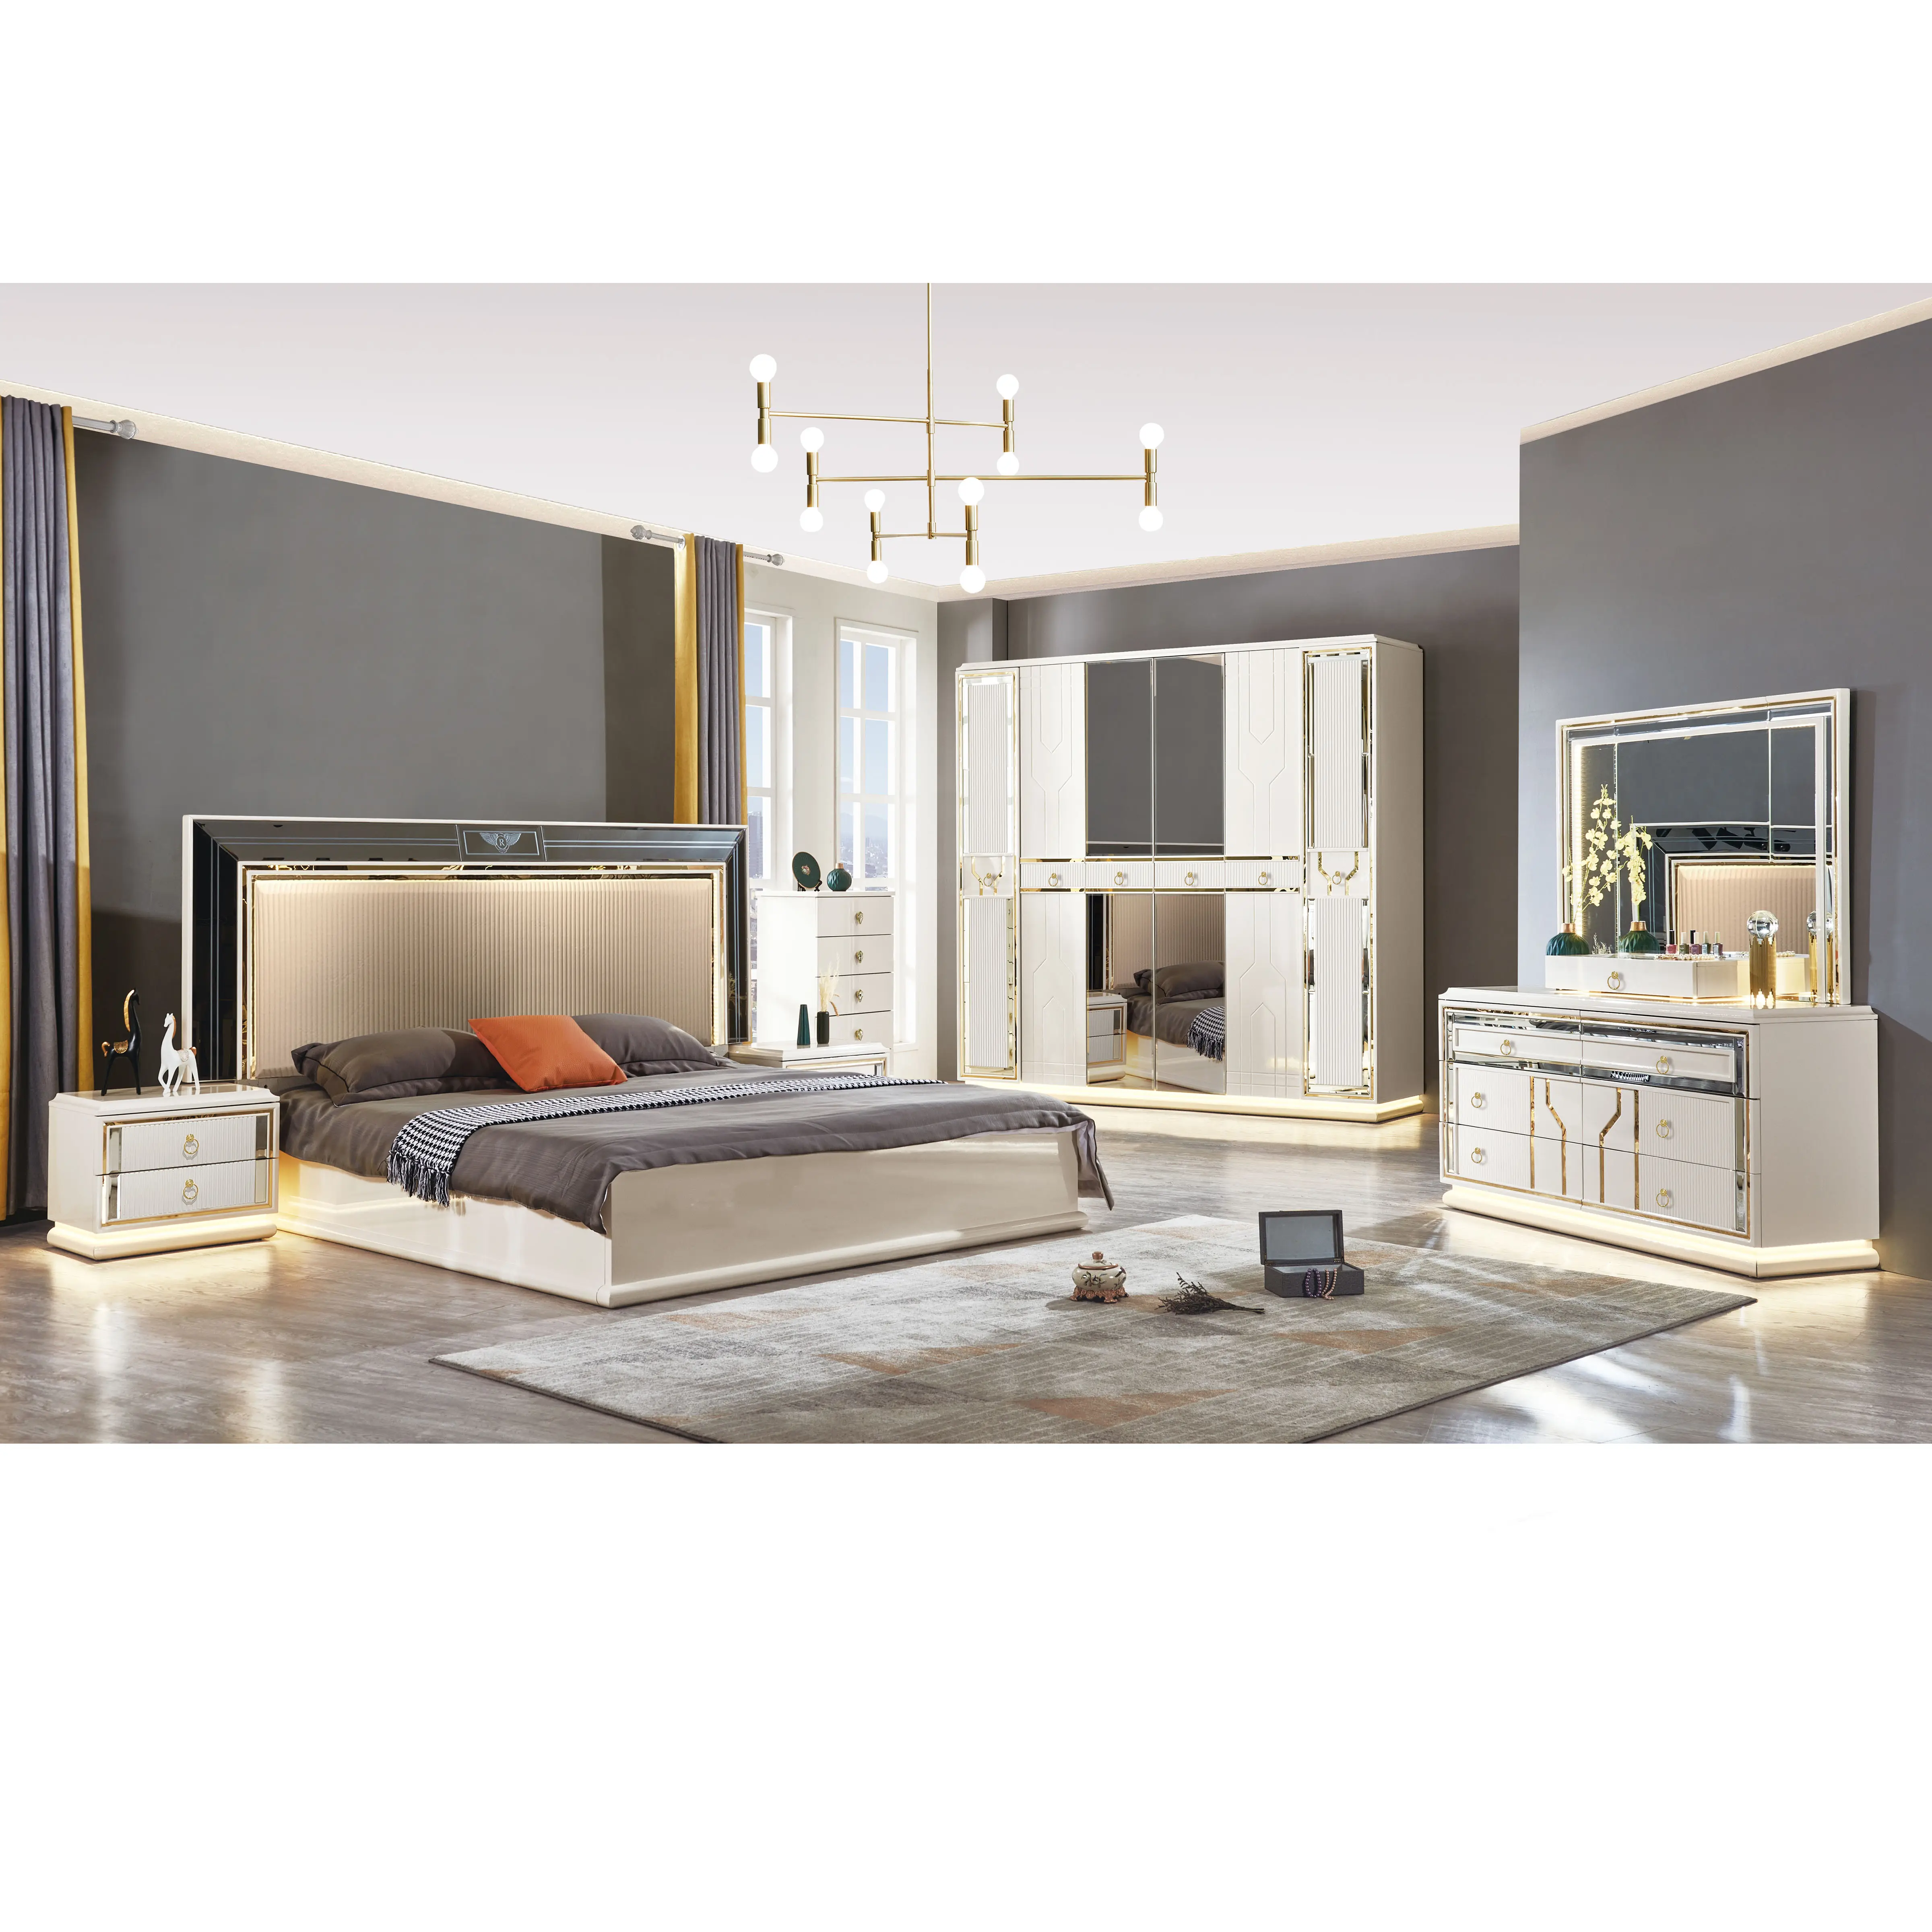 Brand New Design Classic Romantic Full Size Bed Upholstered Mirrored Bedroom Set